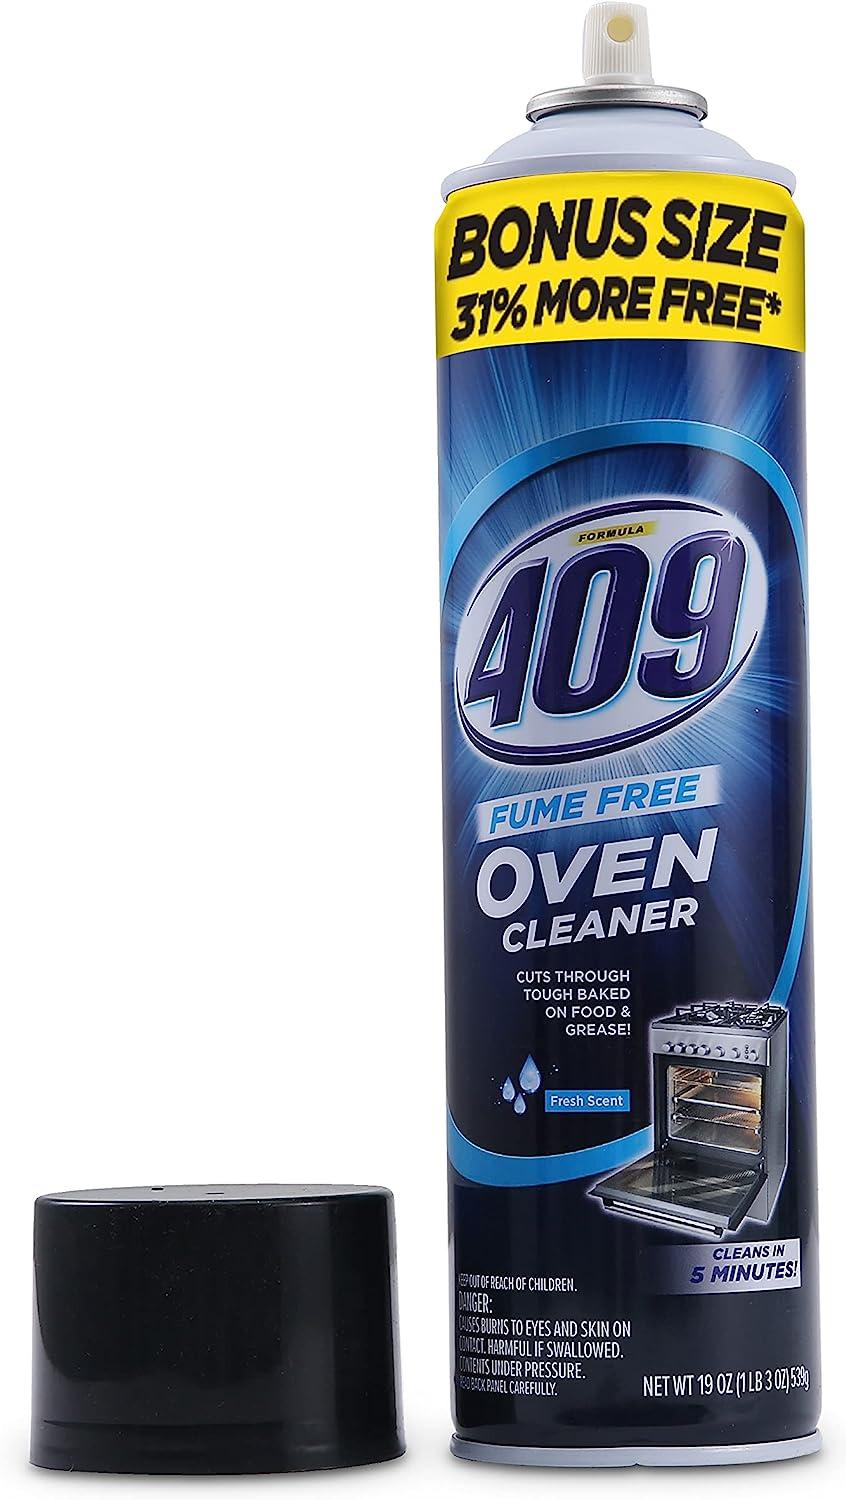 De-Greez Oven and Stove Cleaner